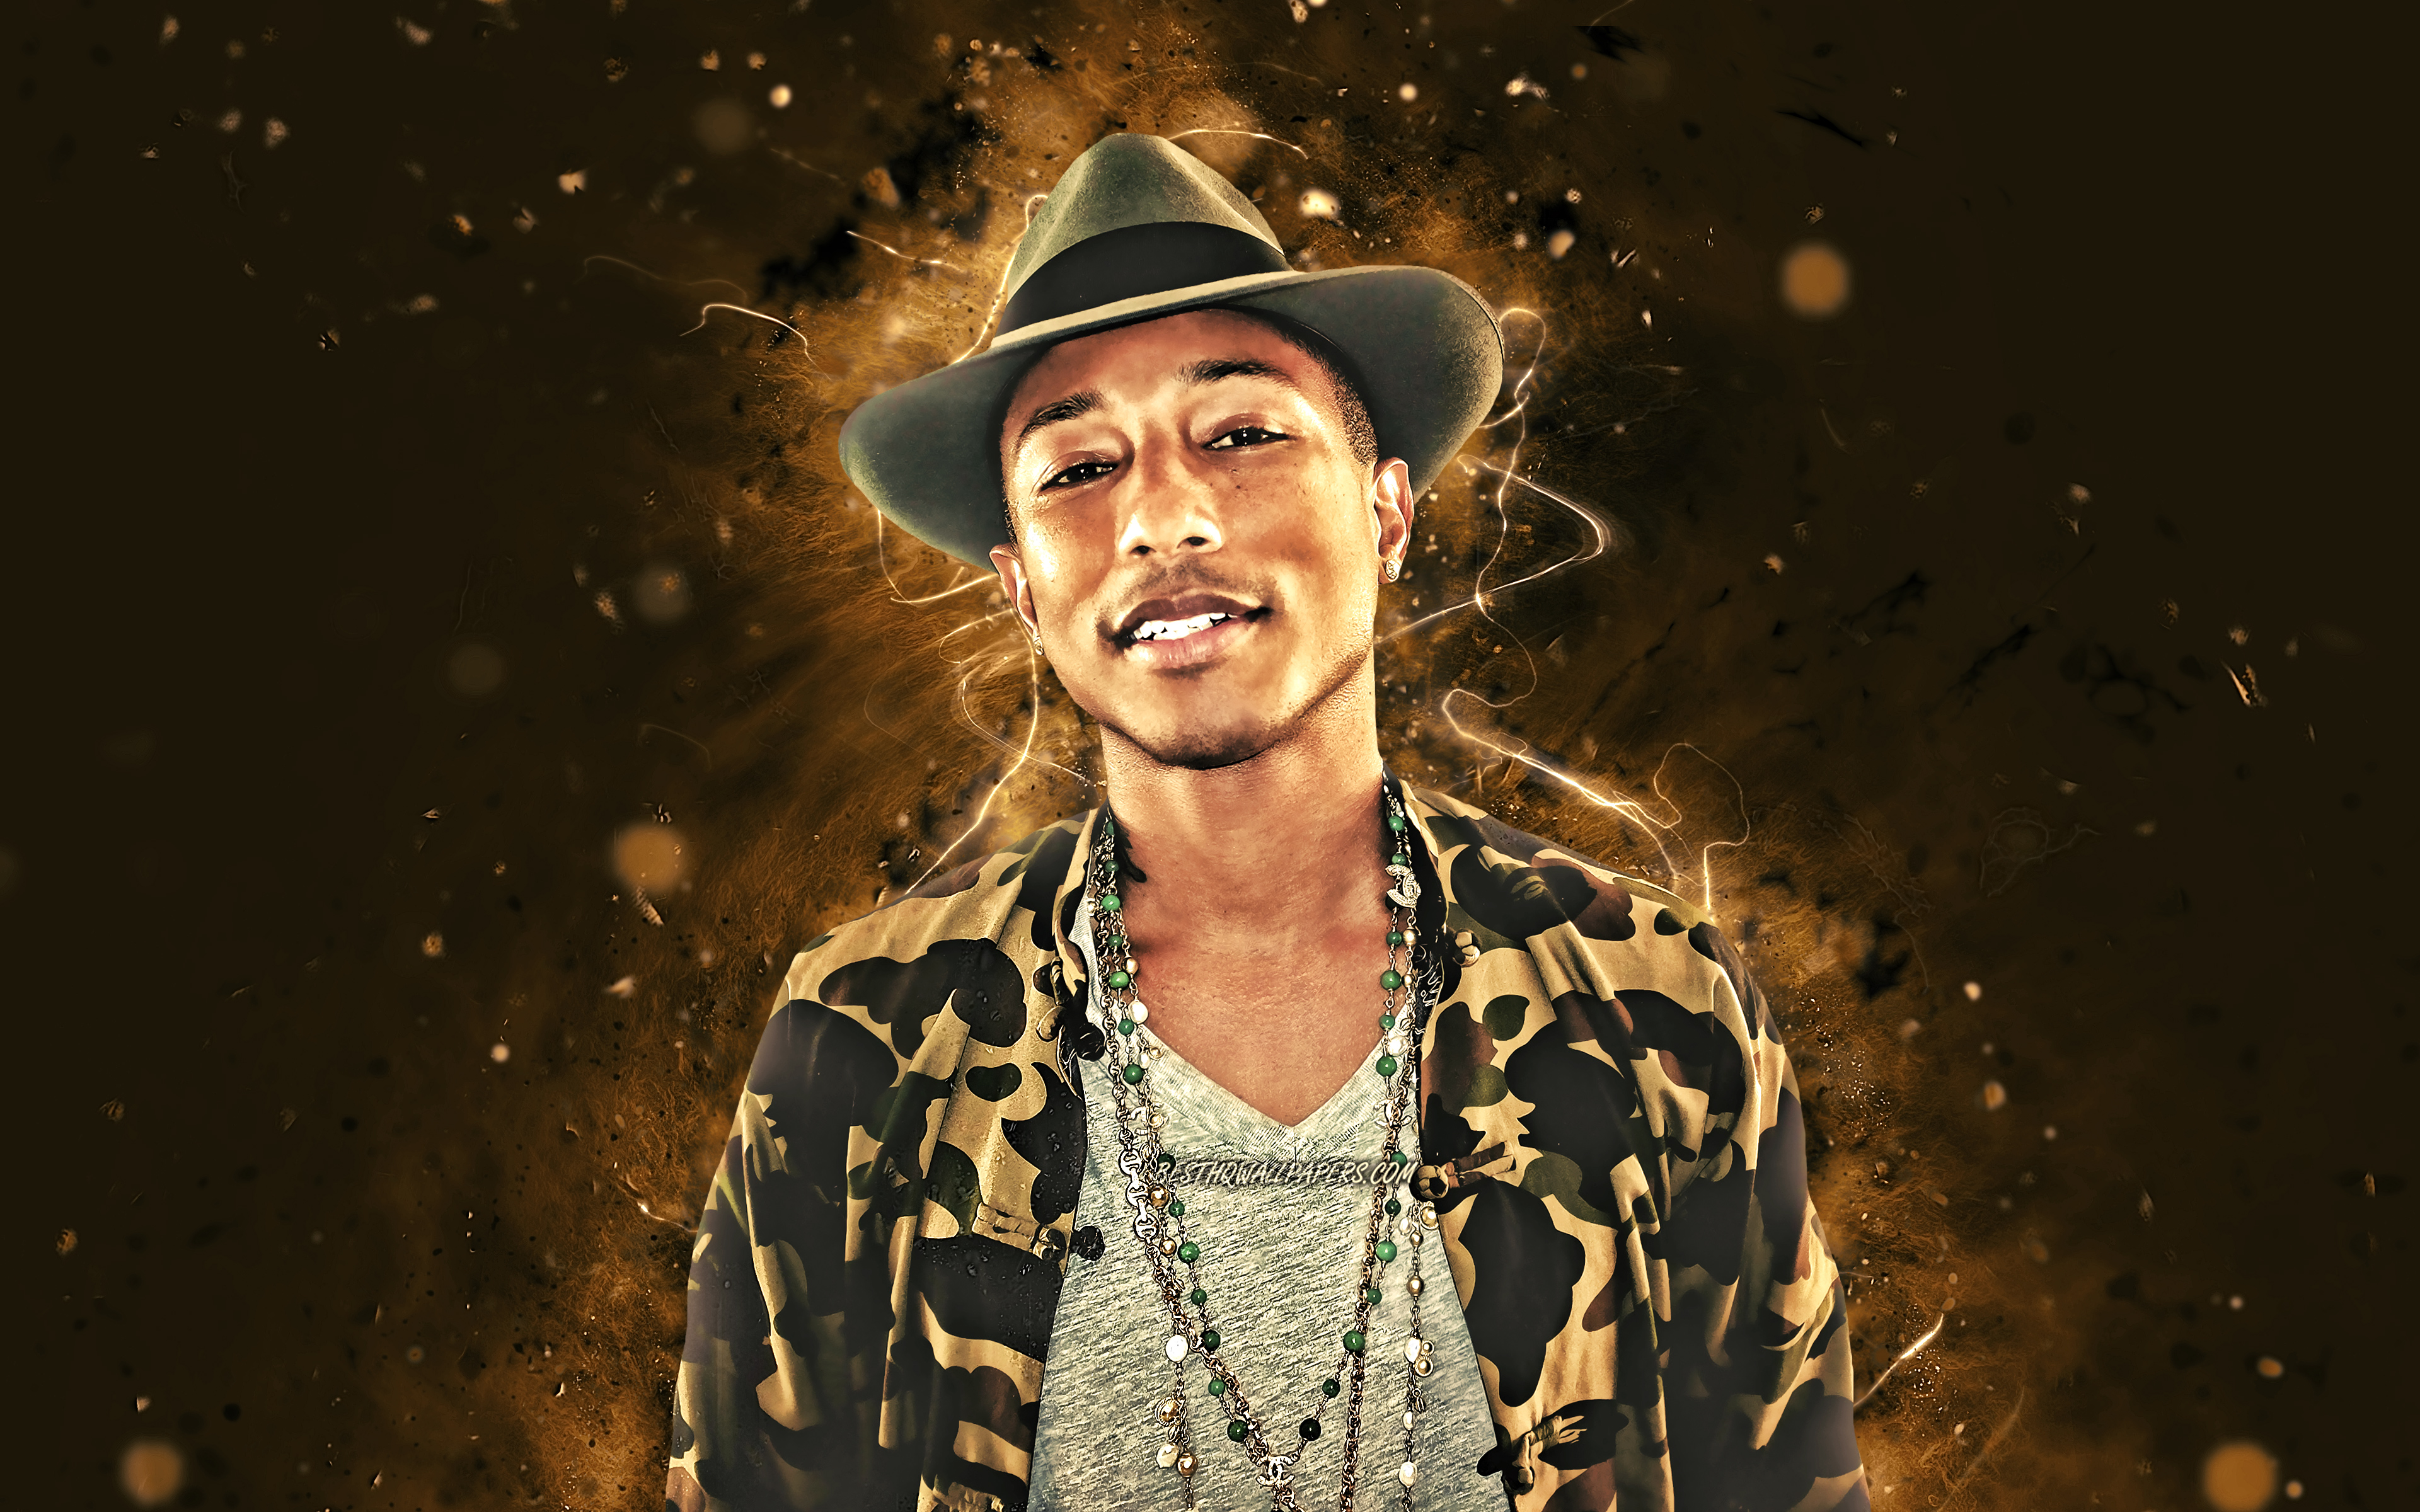 Download wallpaper Pharrell Williams, 4K, brown neon lights, american singer, music stars, Pharrell Lanscilo Williams, american celebrity, superstars, Pharrell Williams 4K for desktop with resolution 3840x2400. High Quality HD picture wallpaper